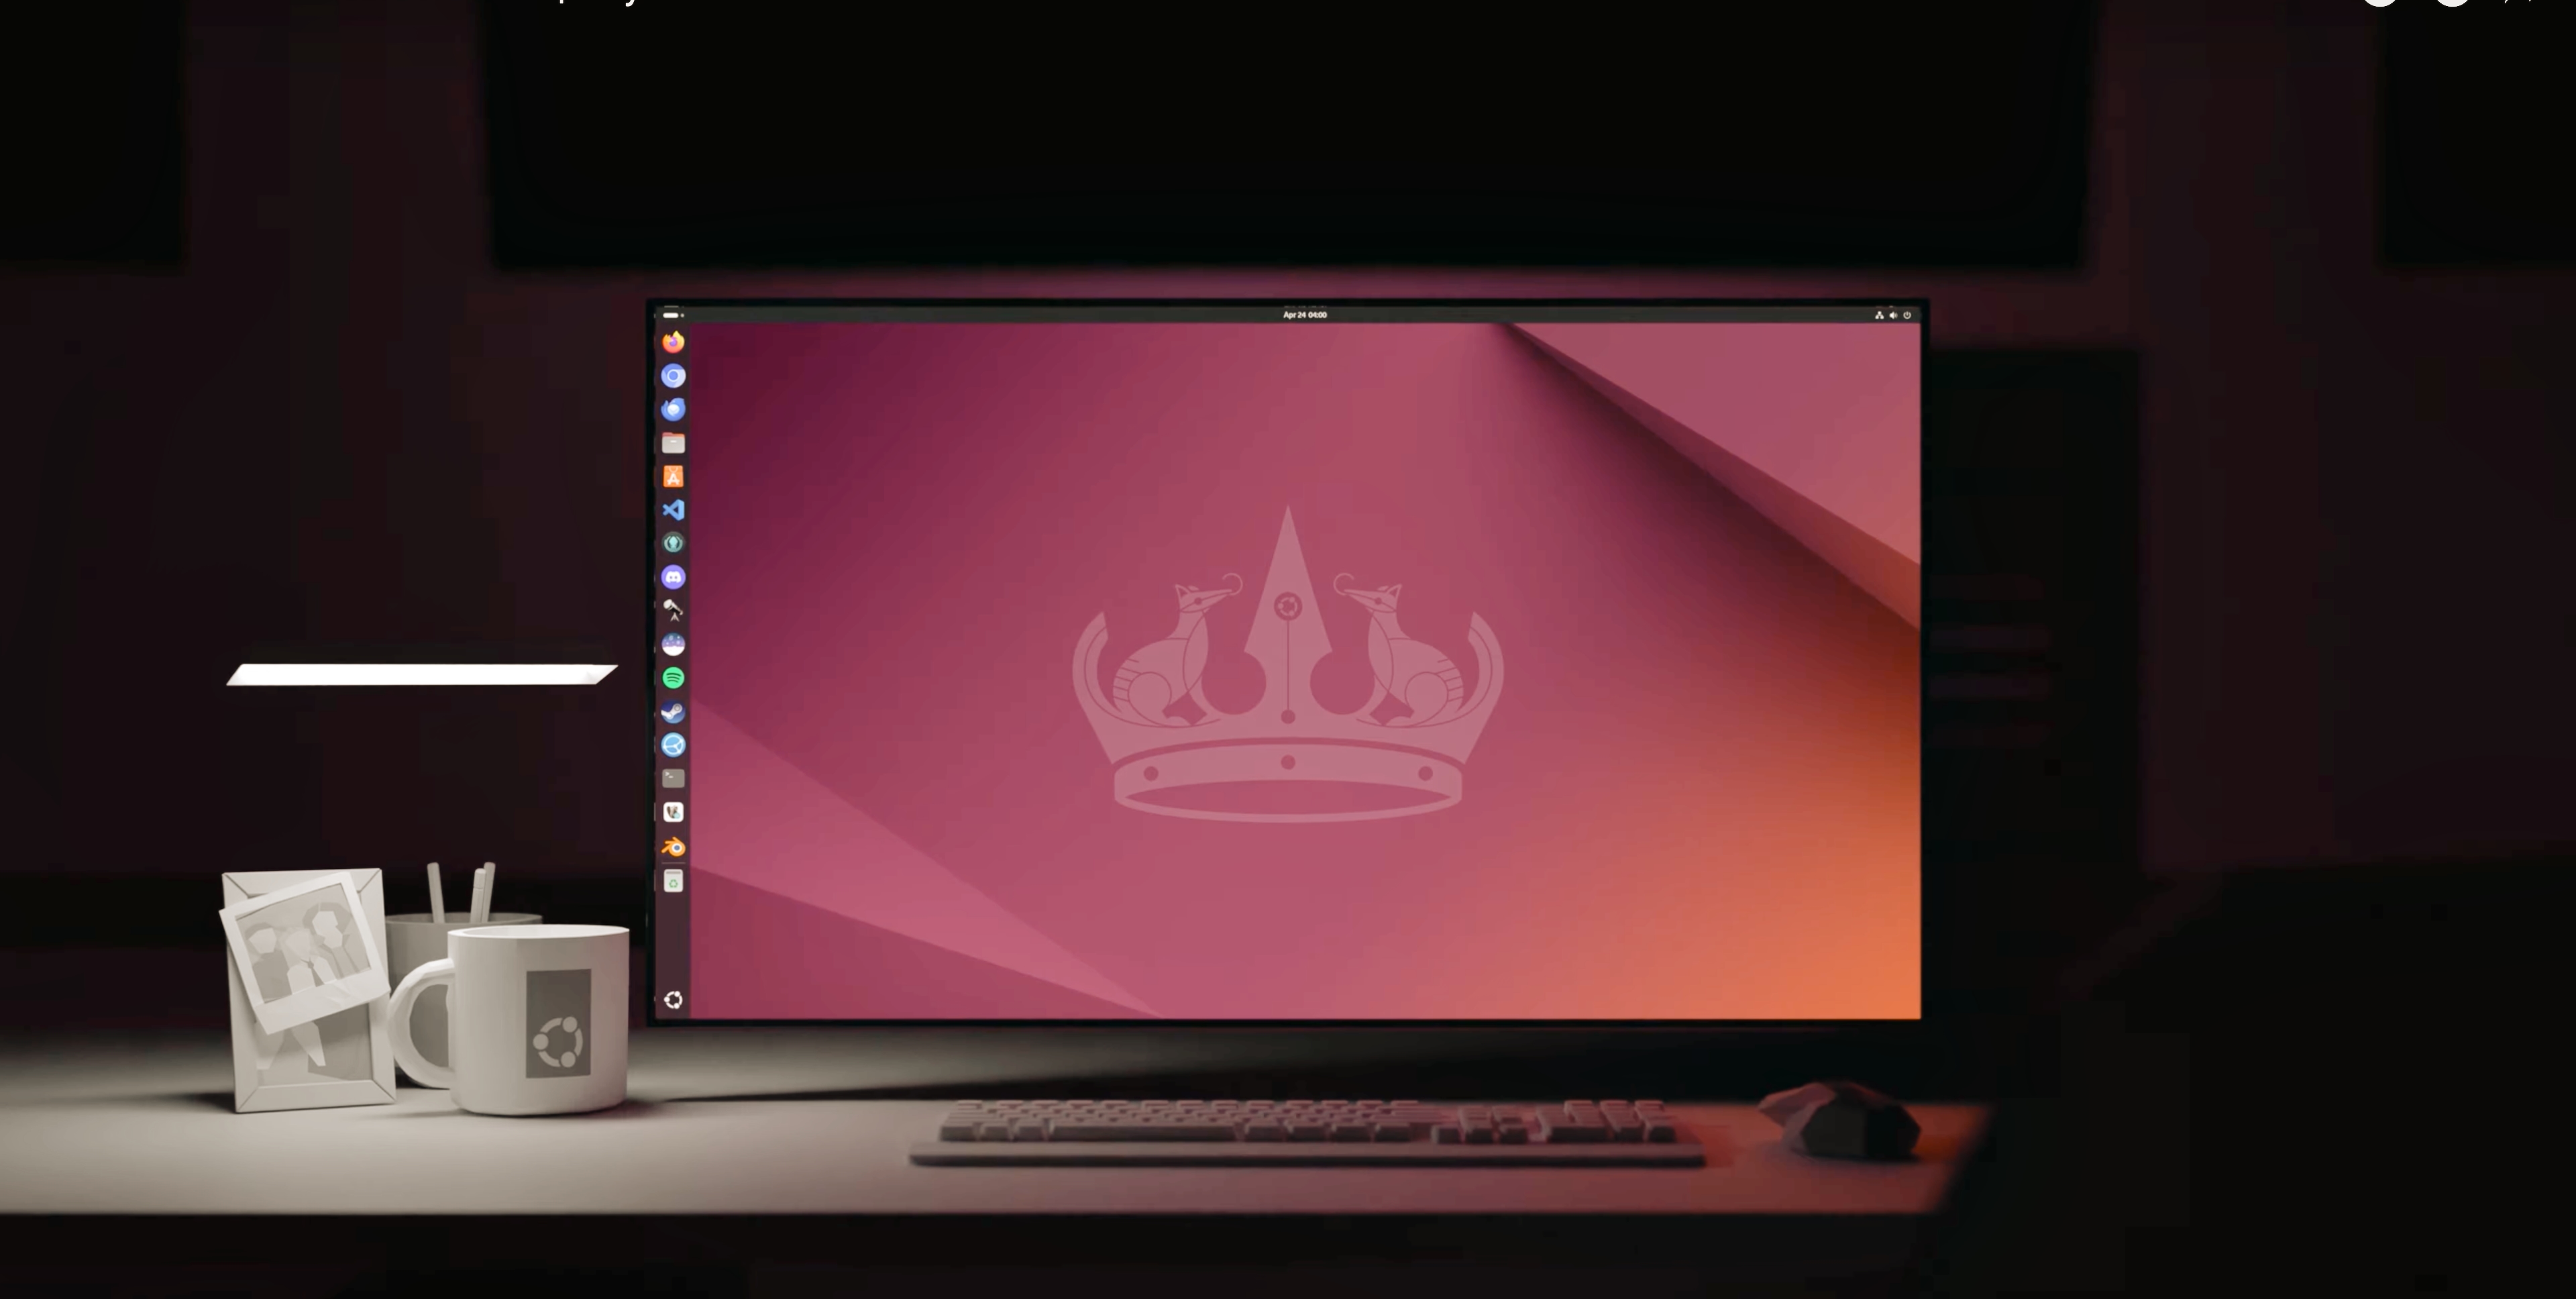 Ubuntu 24.04 LTS, Noble Numbat, overhauls its installation and app experience